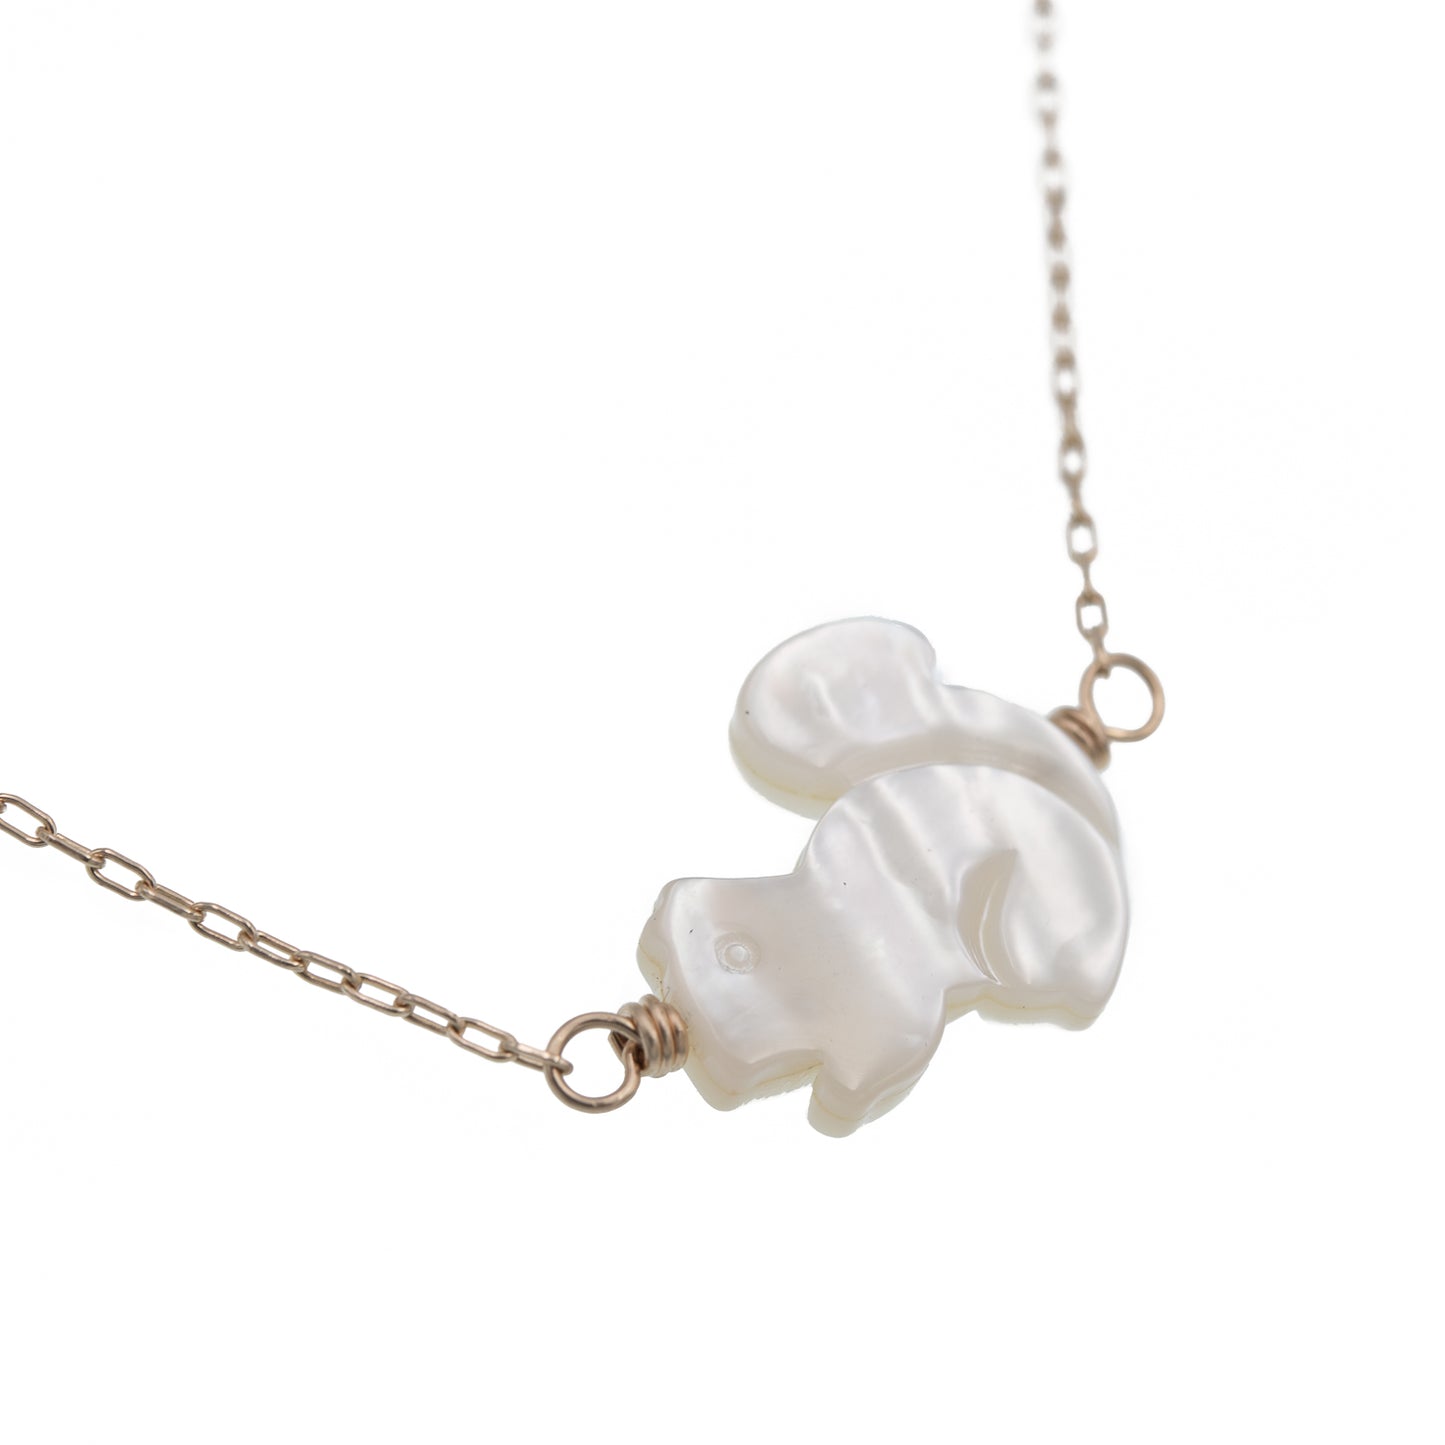 Zurina Ketola Designs carved mother of pearl squirrel necklace in 14K gold fill. Close Up.